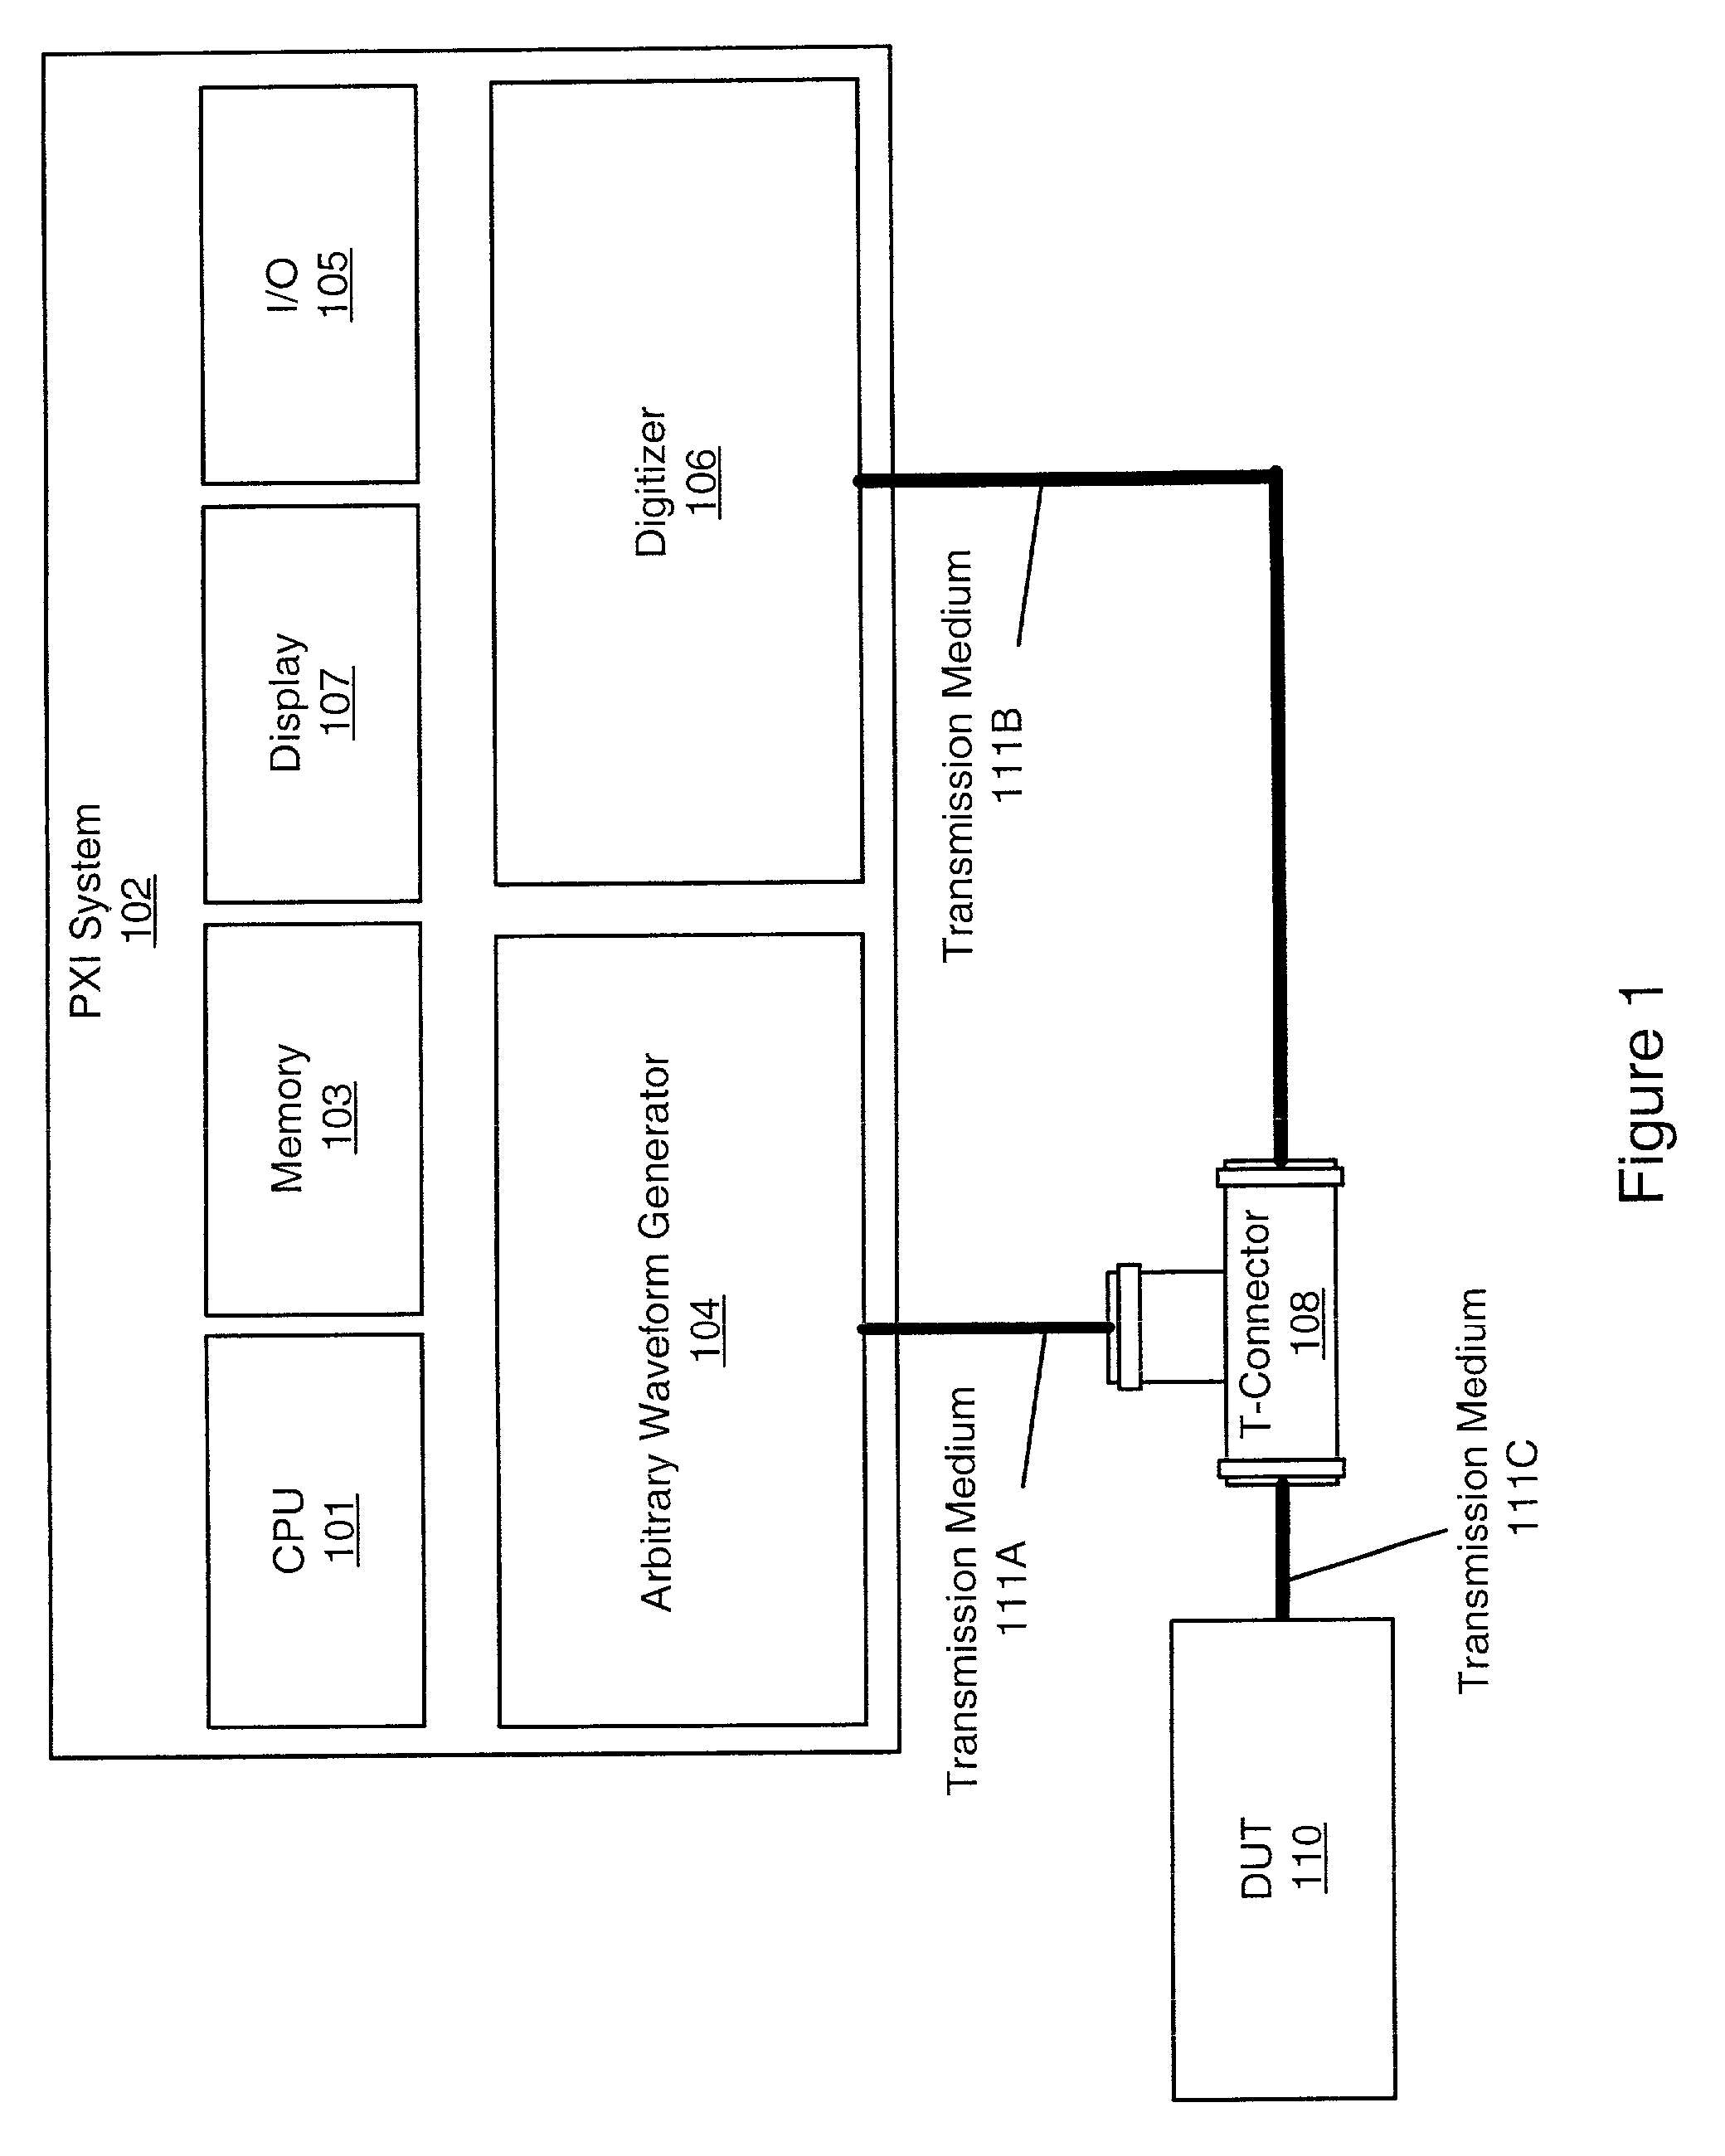 System and method for performing time domain reflectometry using gaussian pulses